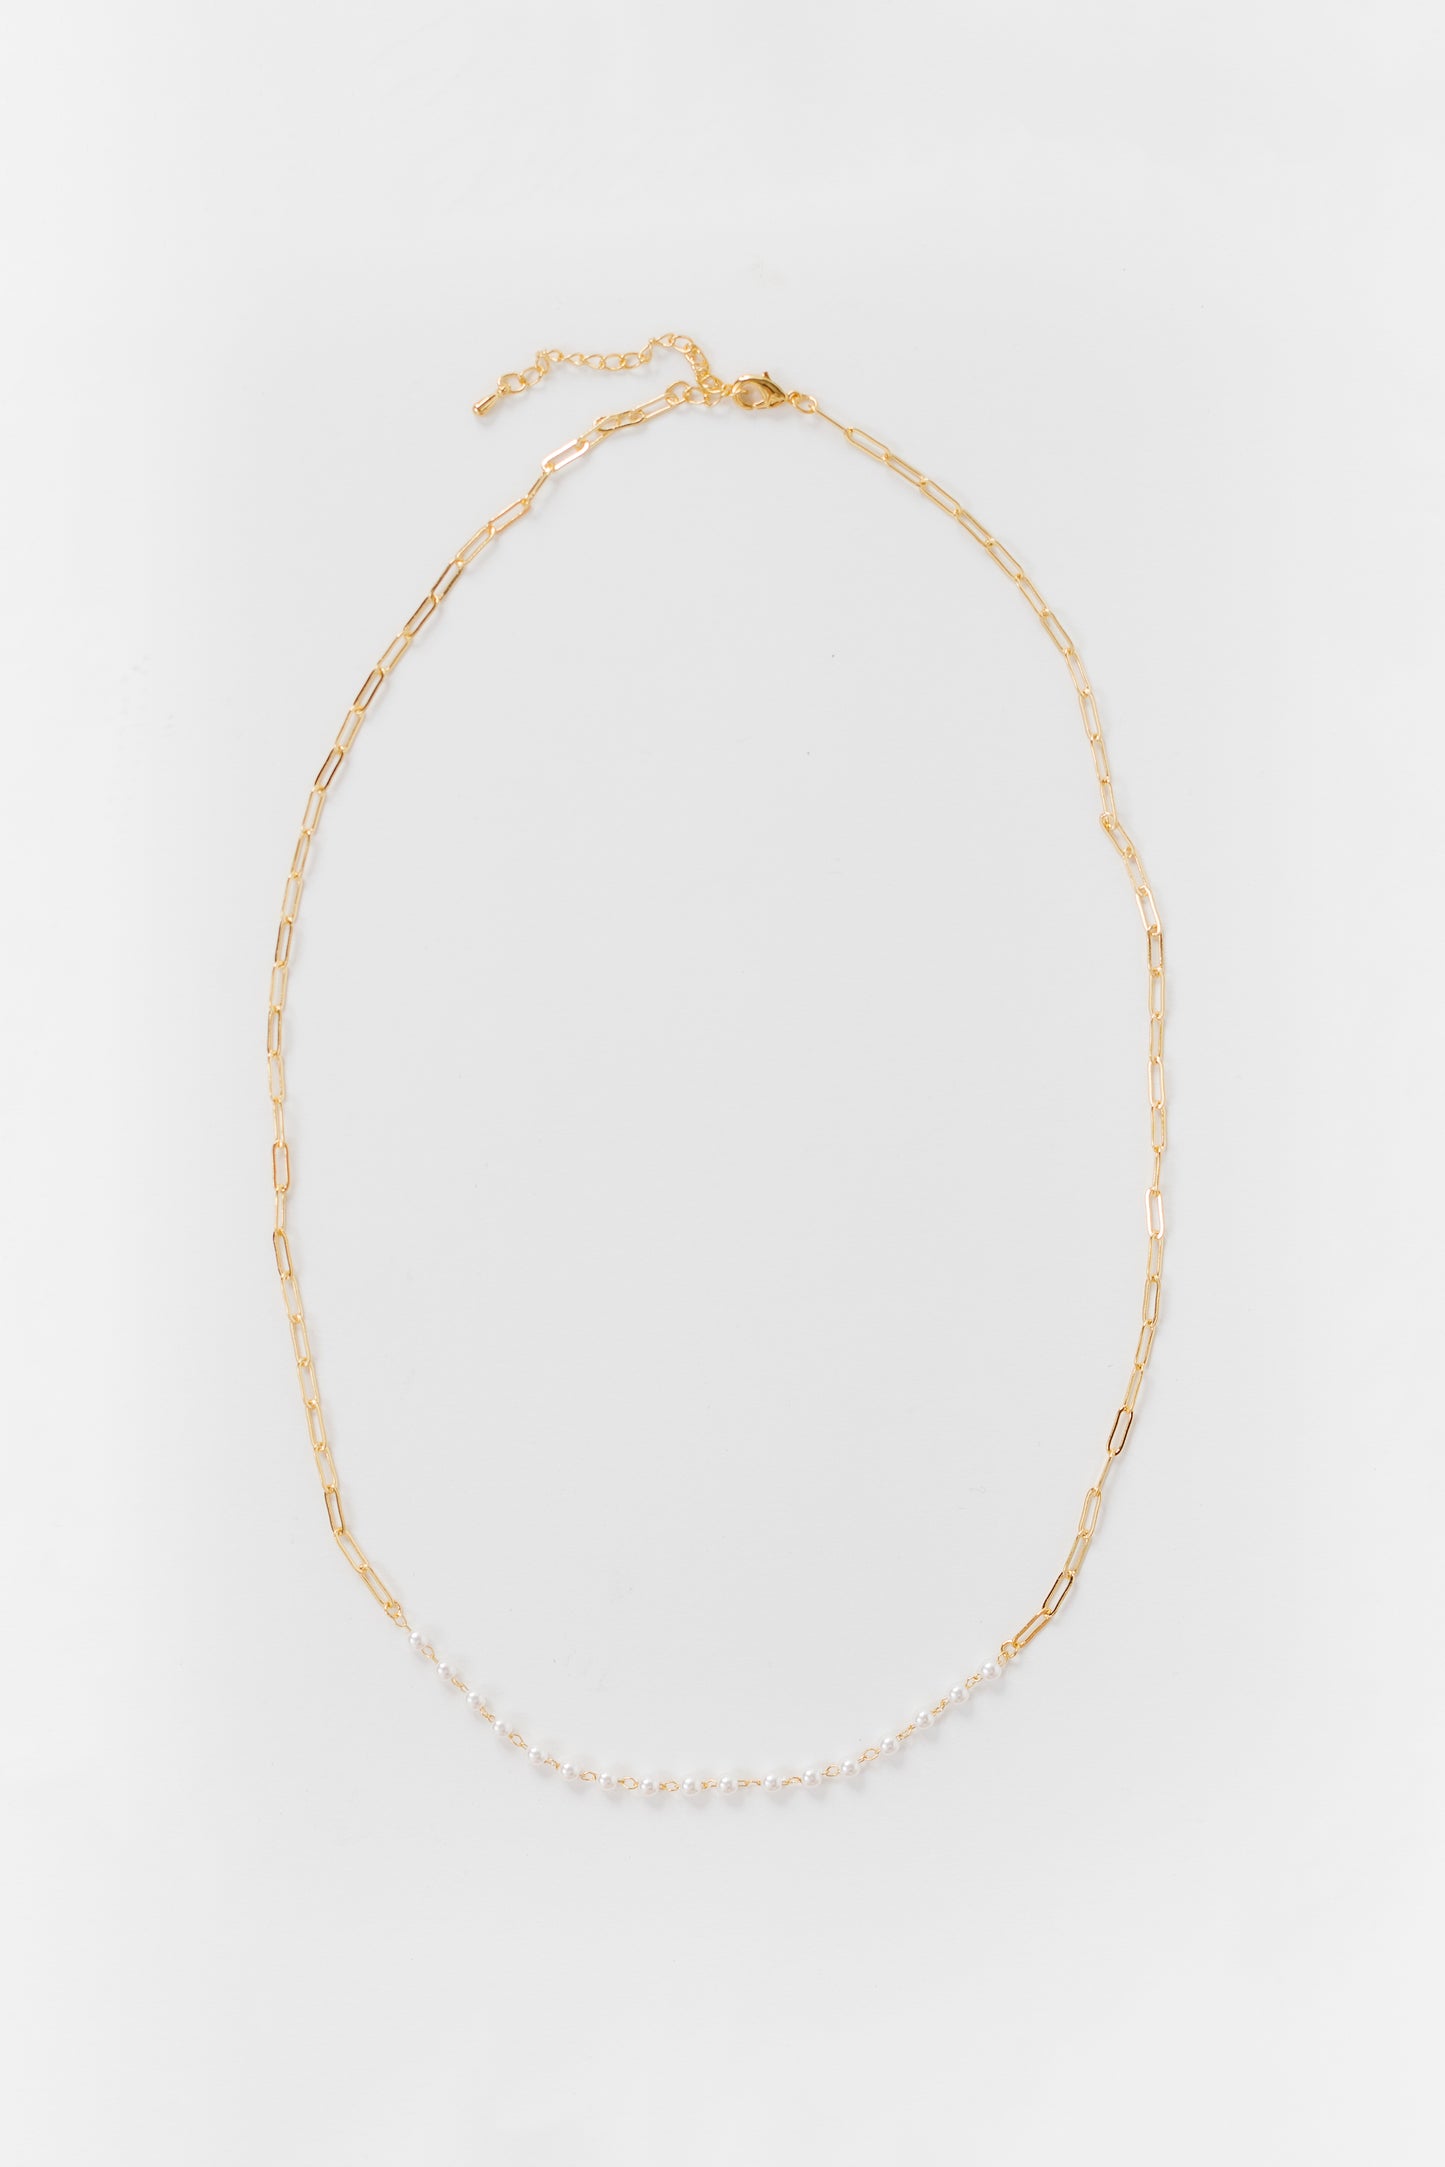 Cove Delicate Pearl Paperclip Necklace